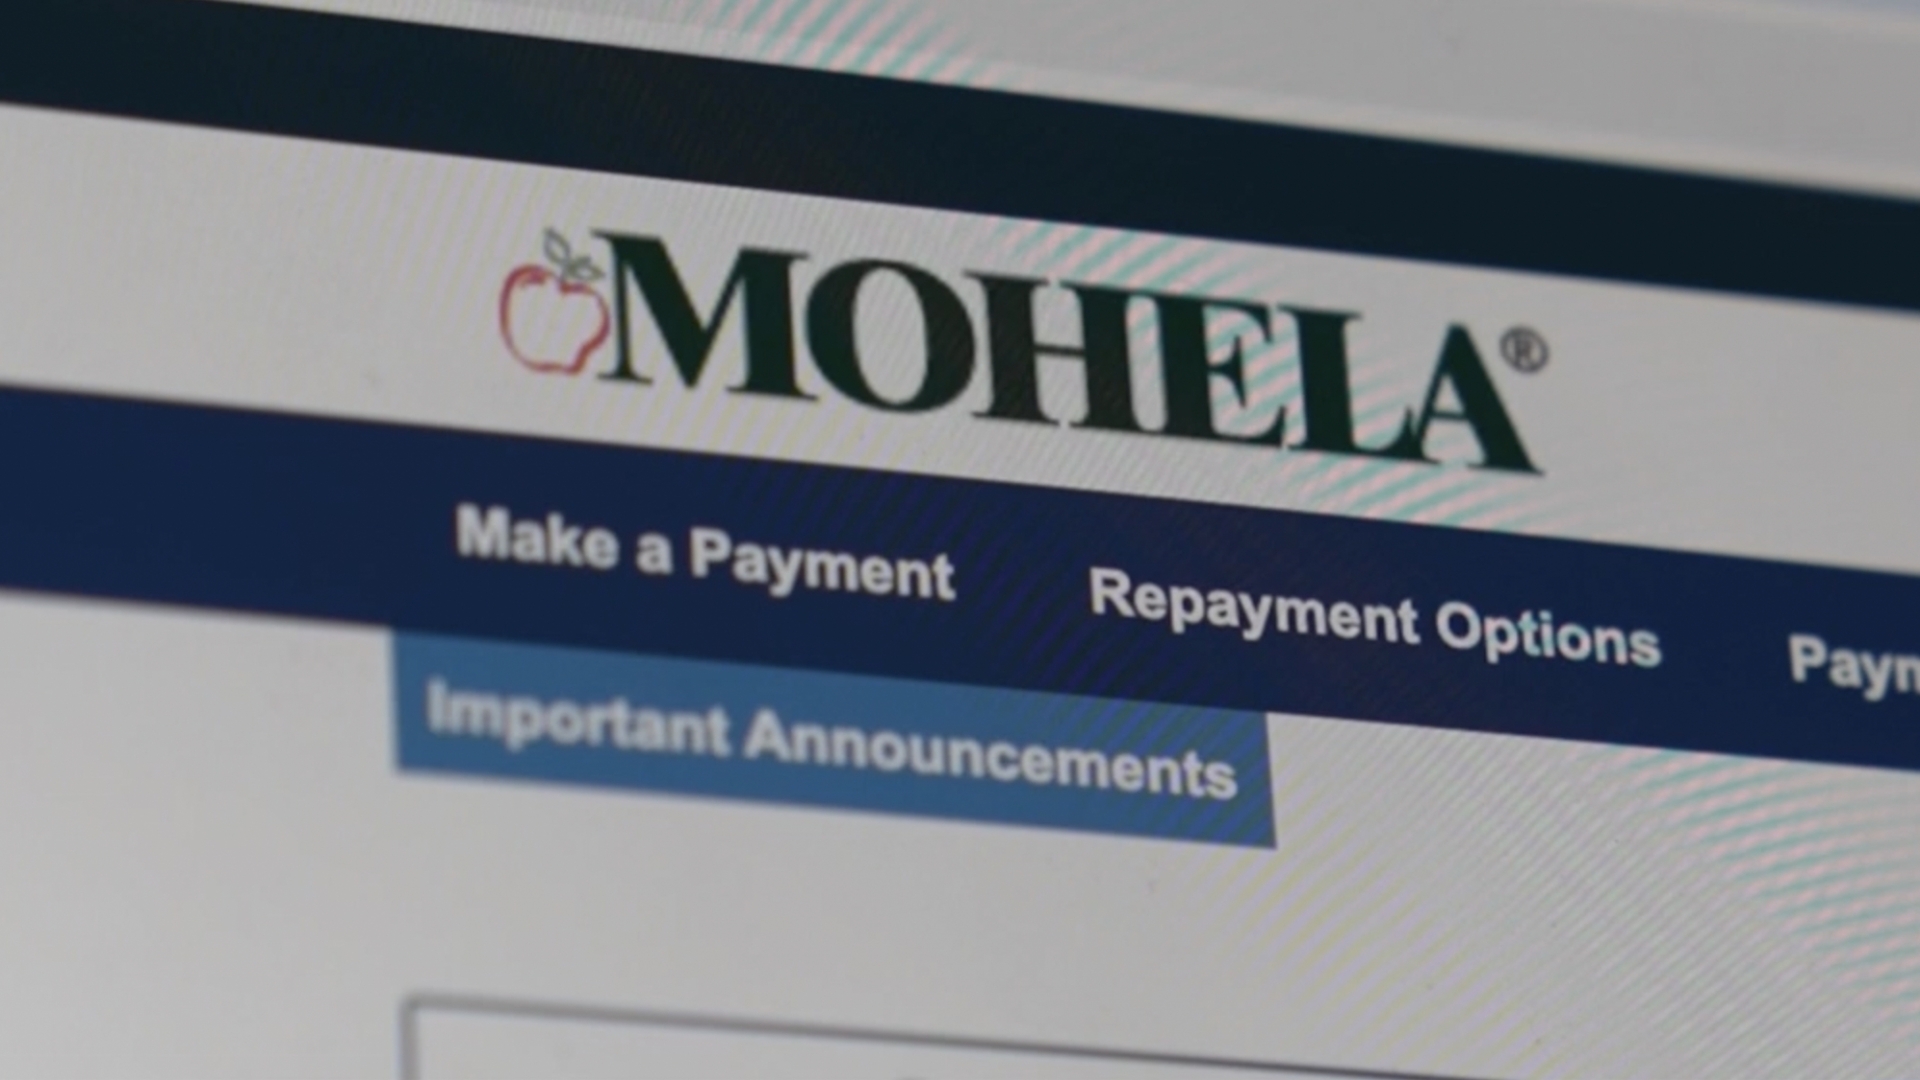 Unveiled How Student Loan Hold Times Affect Millions, Mohela Under Fire---